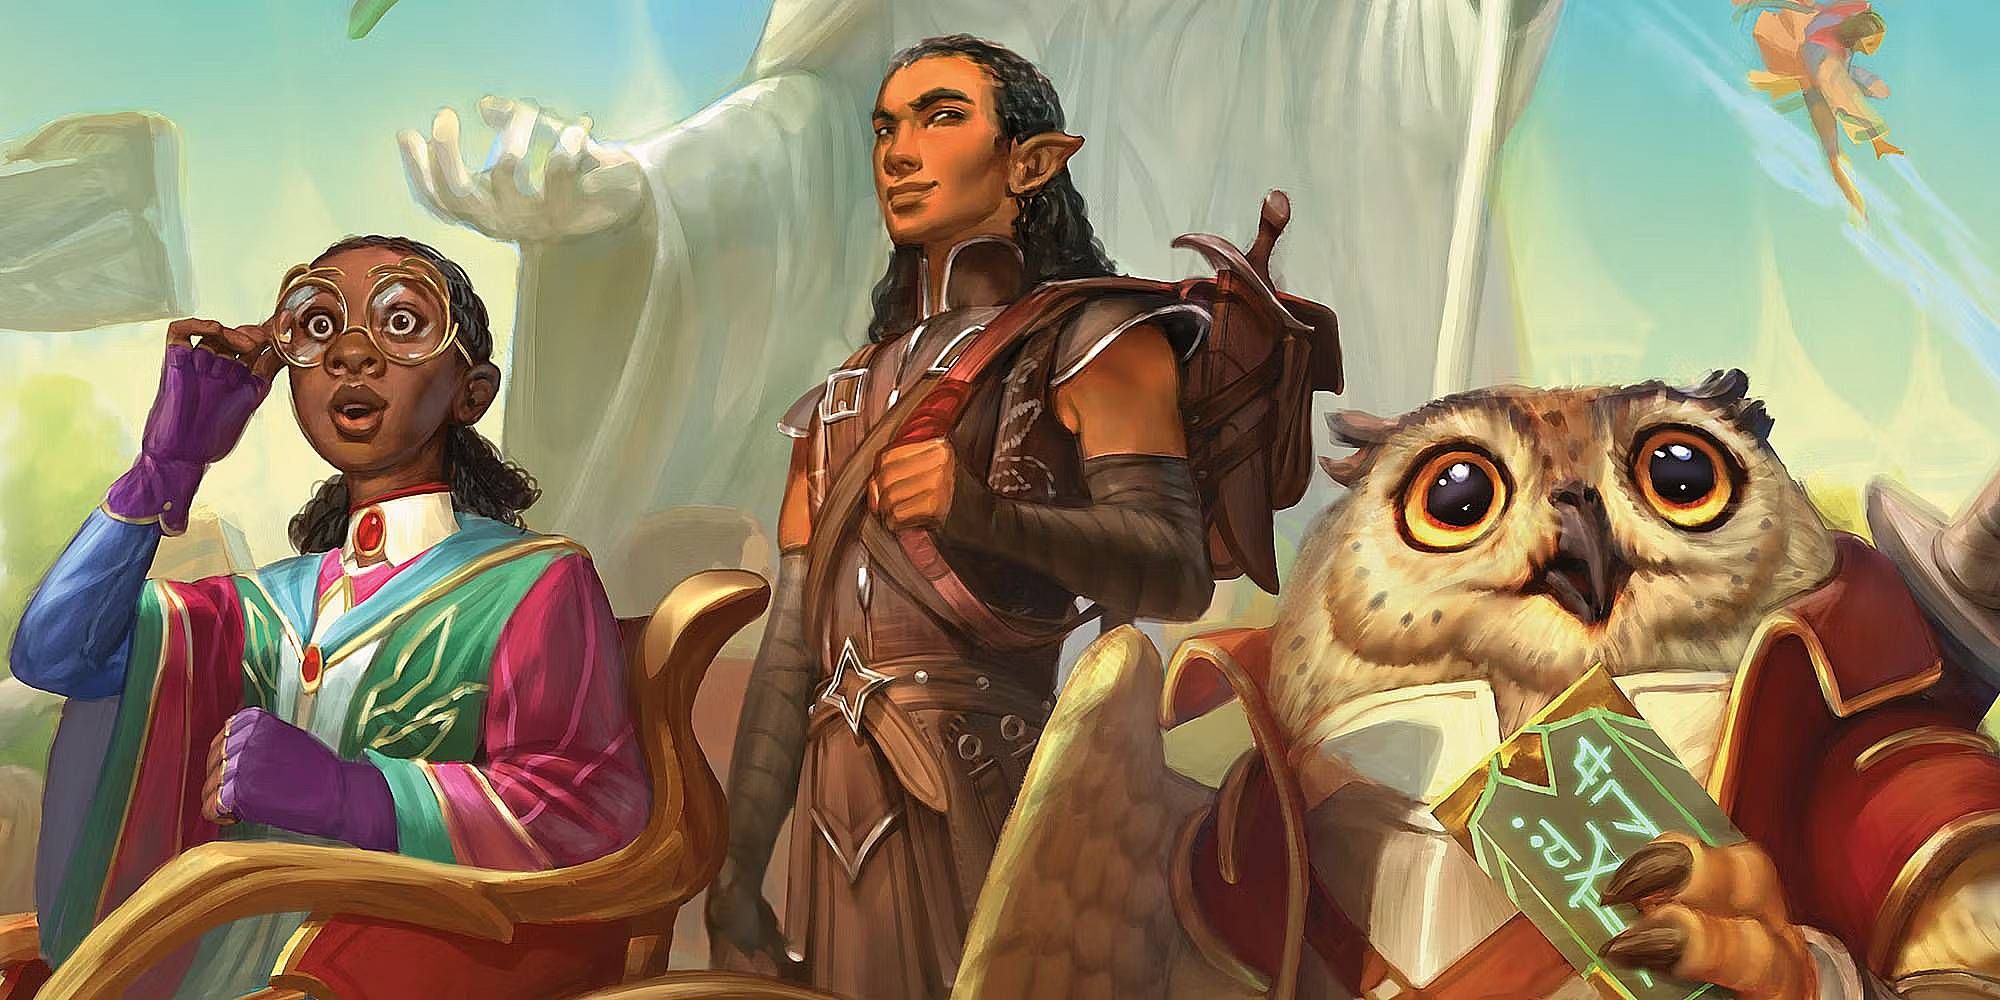 Three figures, a dark-skinned young woman, a half-elf, and an owl, look around curiously.